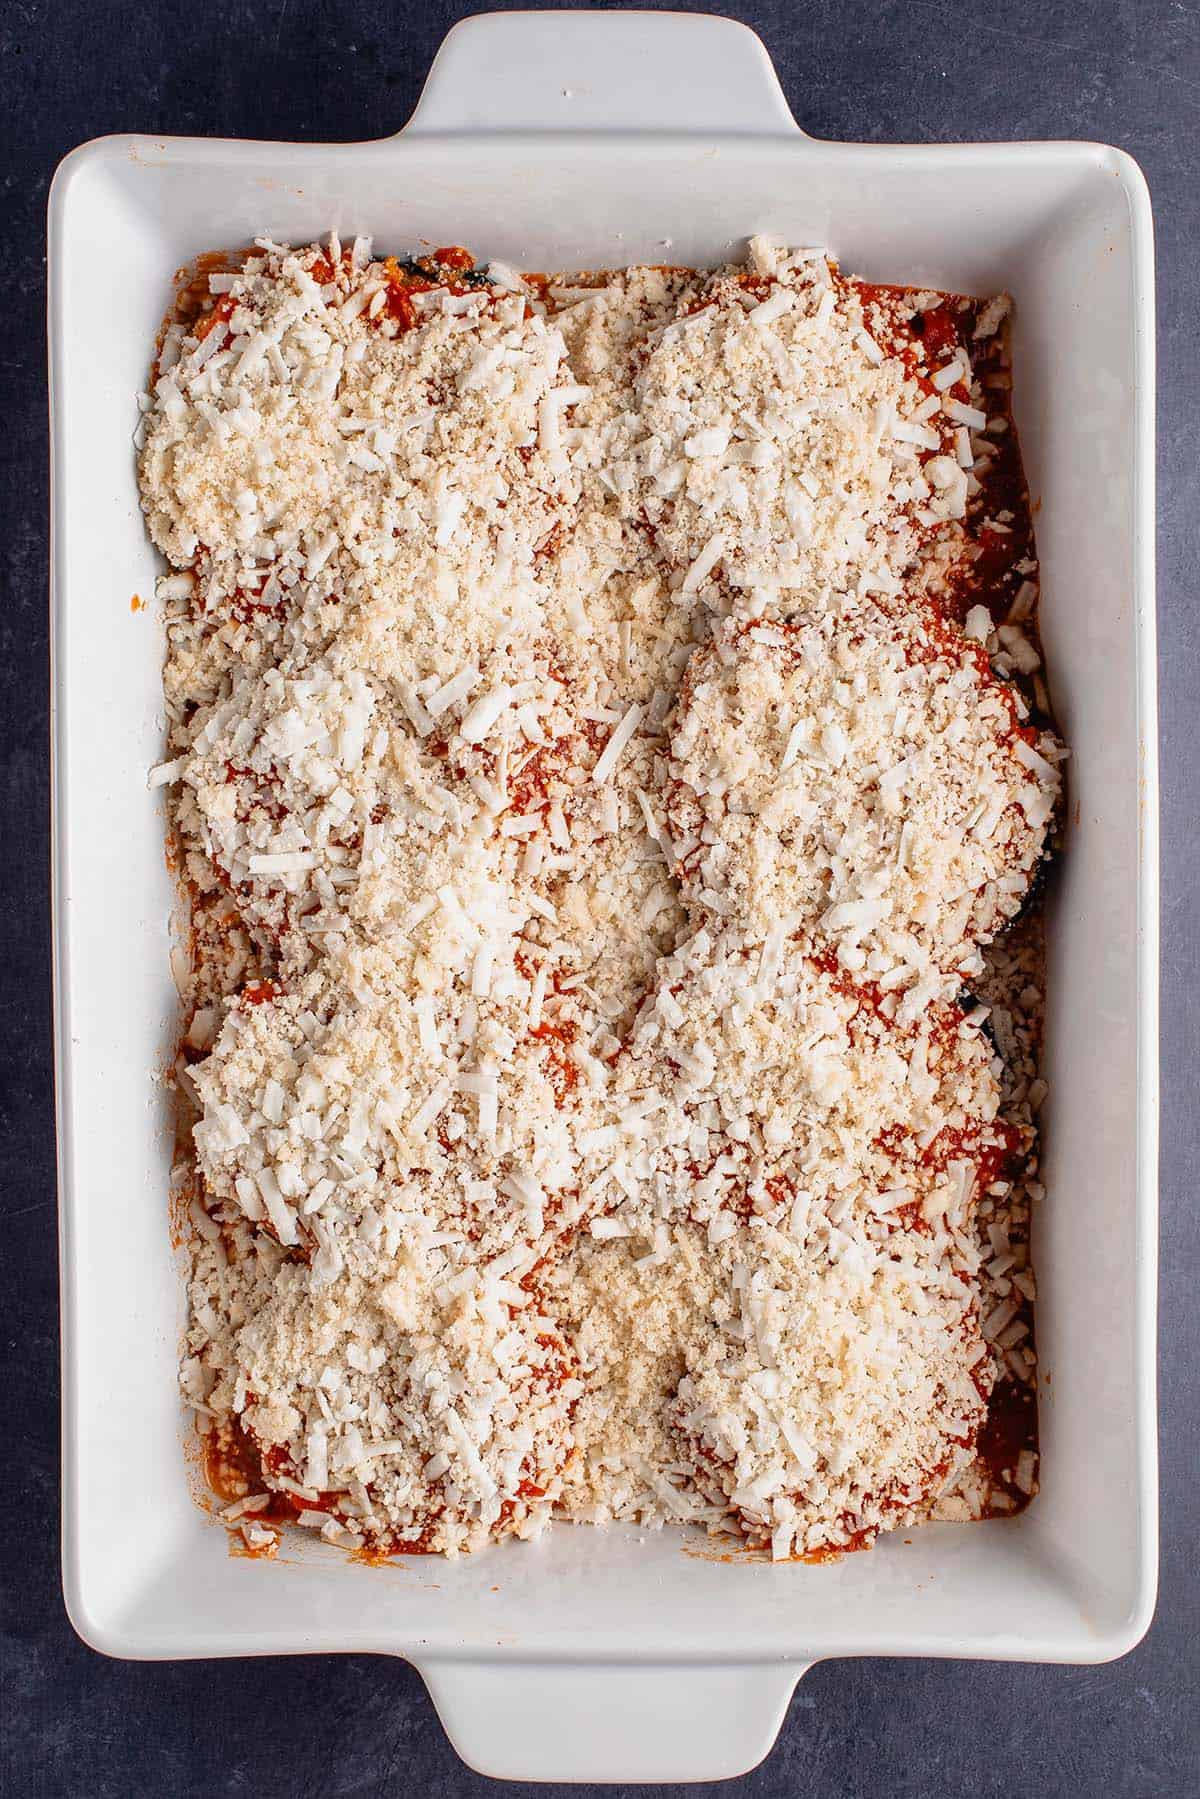 uncooked baking dish filled with eggplant parmesan